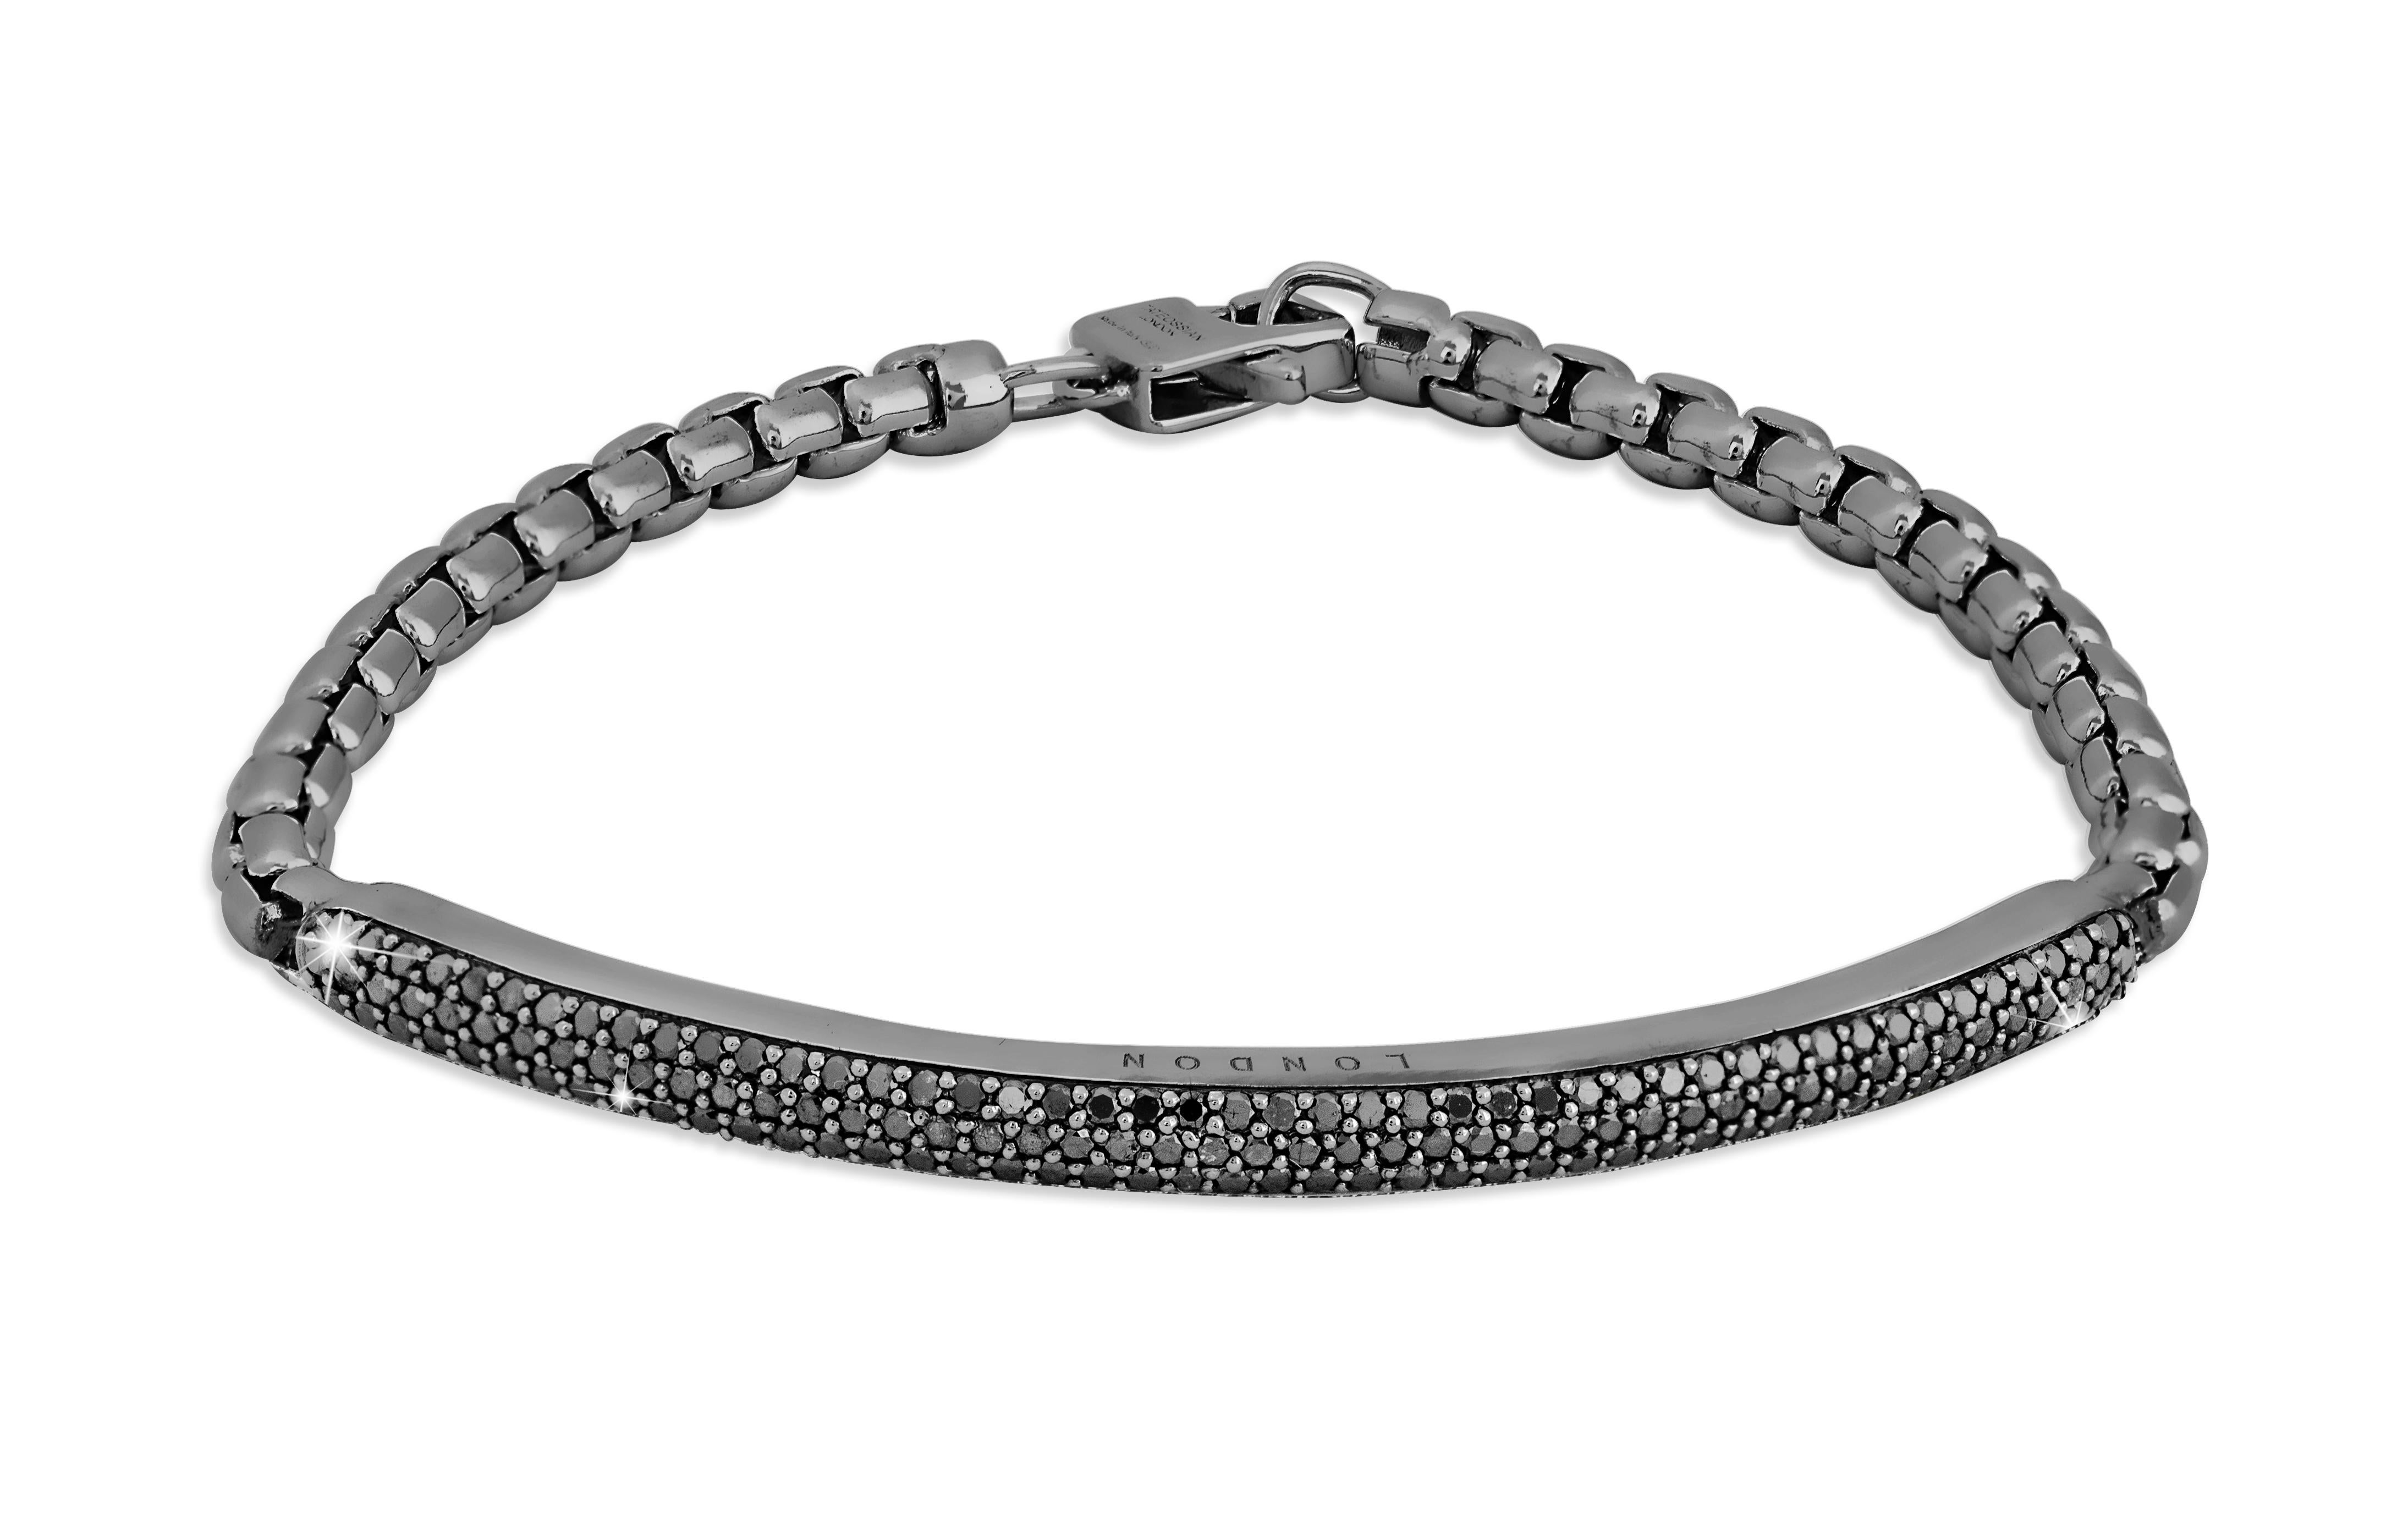 Black Rhodium Plated Sterling Silver Windsor Bracelet with Black Diamonds, Large

This bracelet features a sterling silver ID bar set with a pave surface of 139 black diamonds. All the precious stones are hand-selected and all handset under a